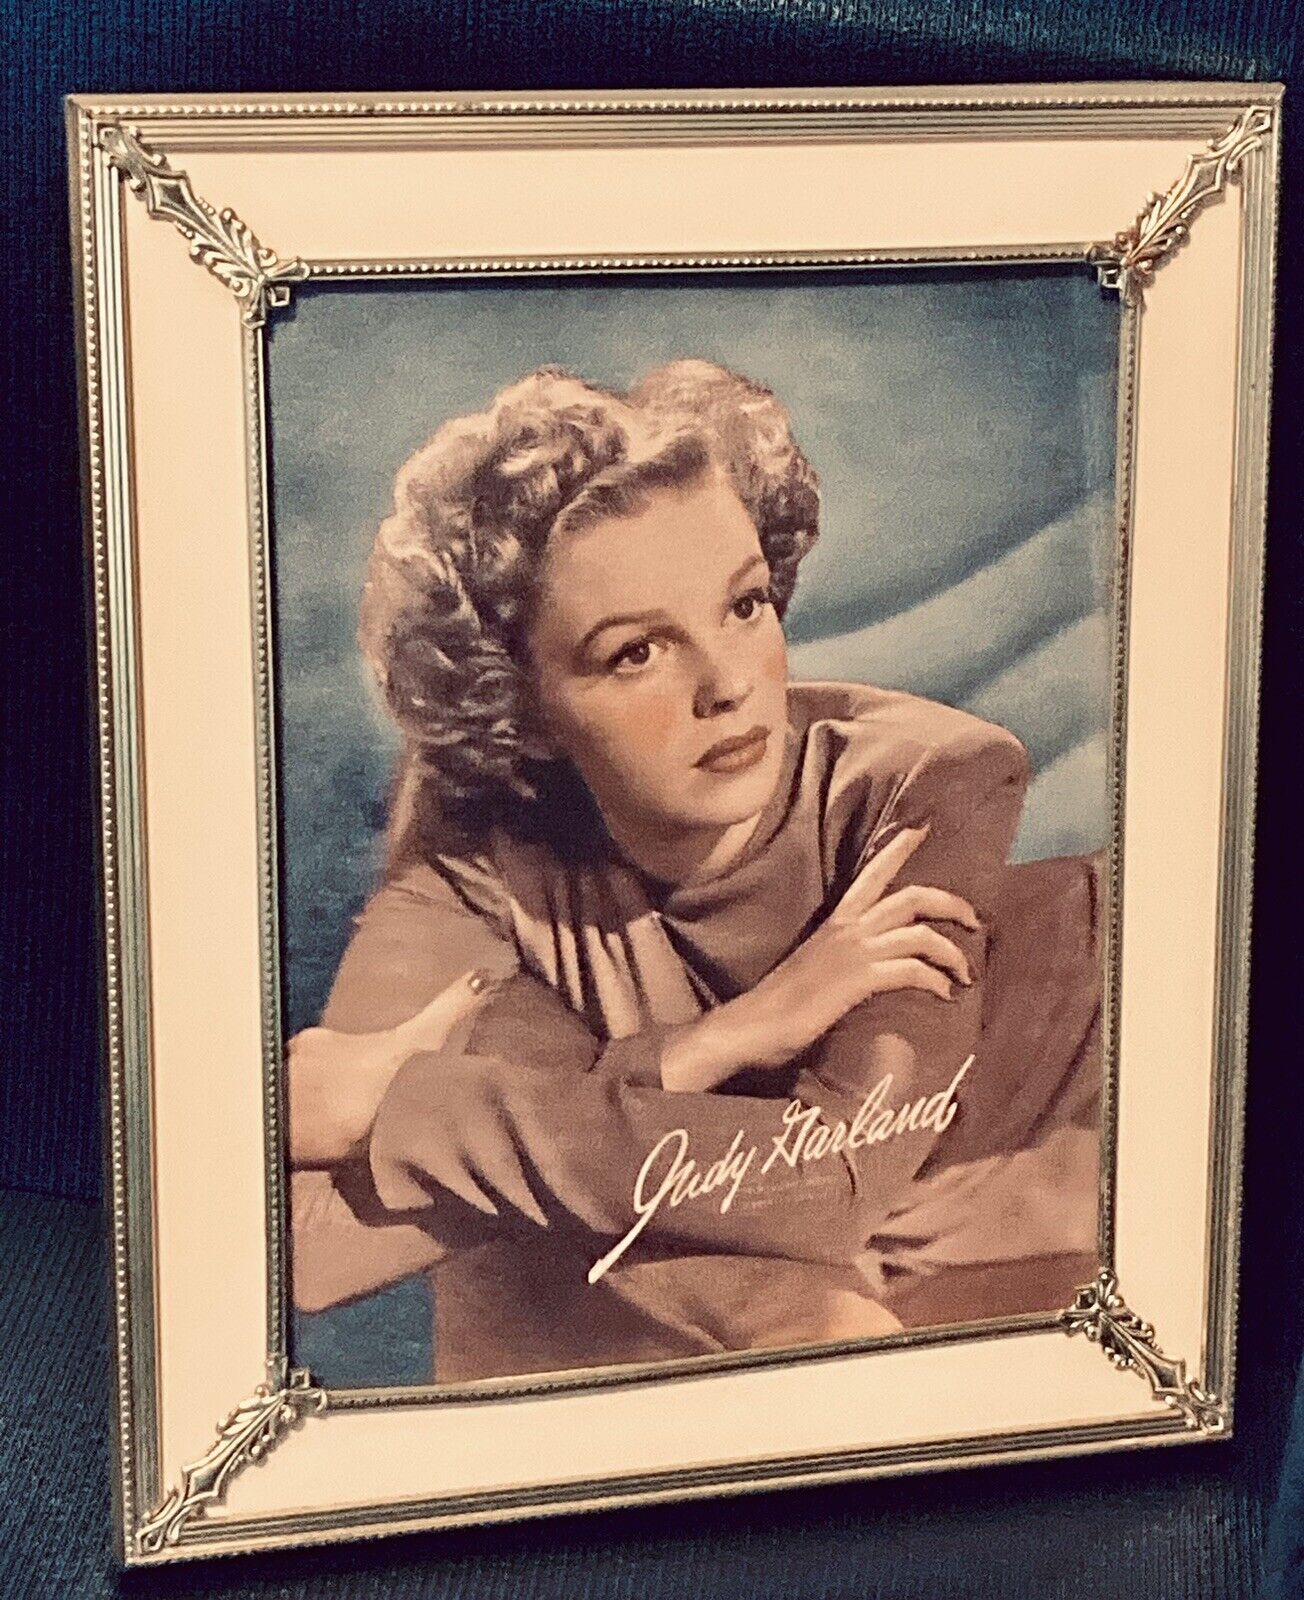 VTG / Antique Picture Frame Hollywood, Art Nouveau Reverse Painted. Judy Garland